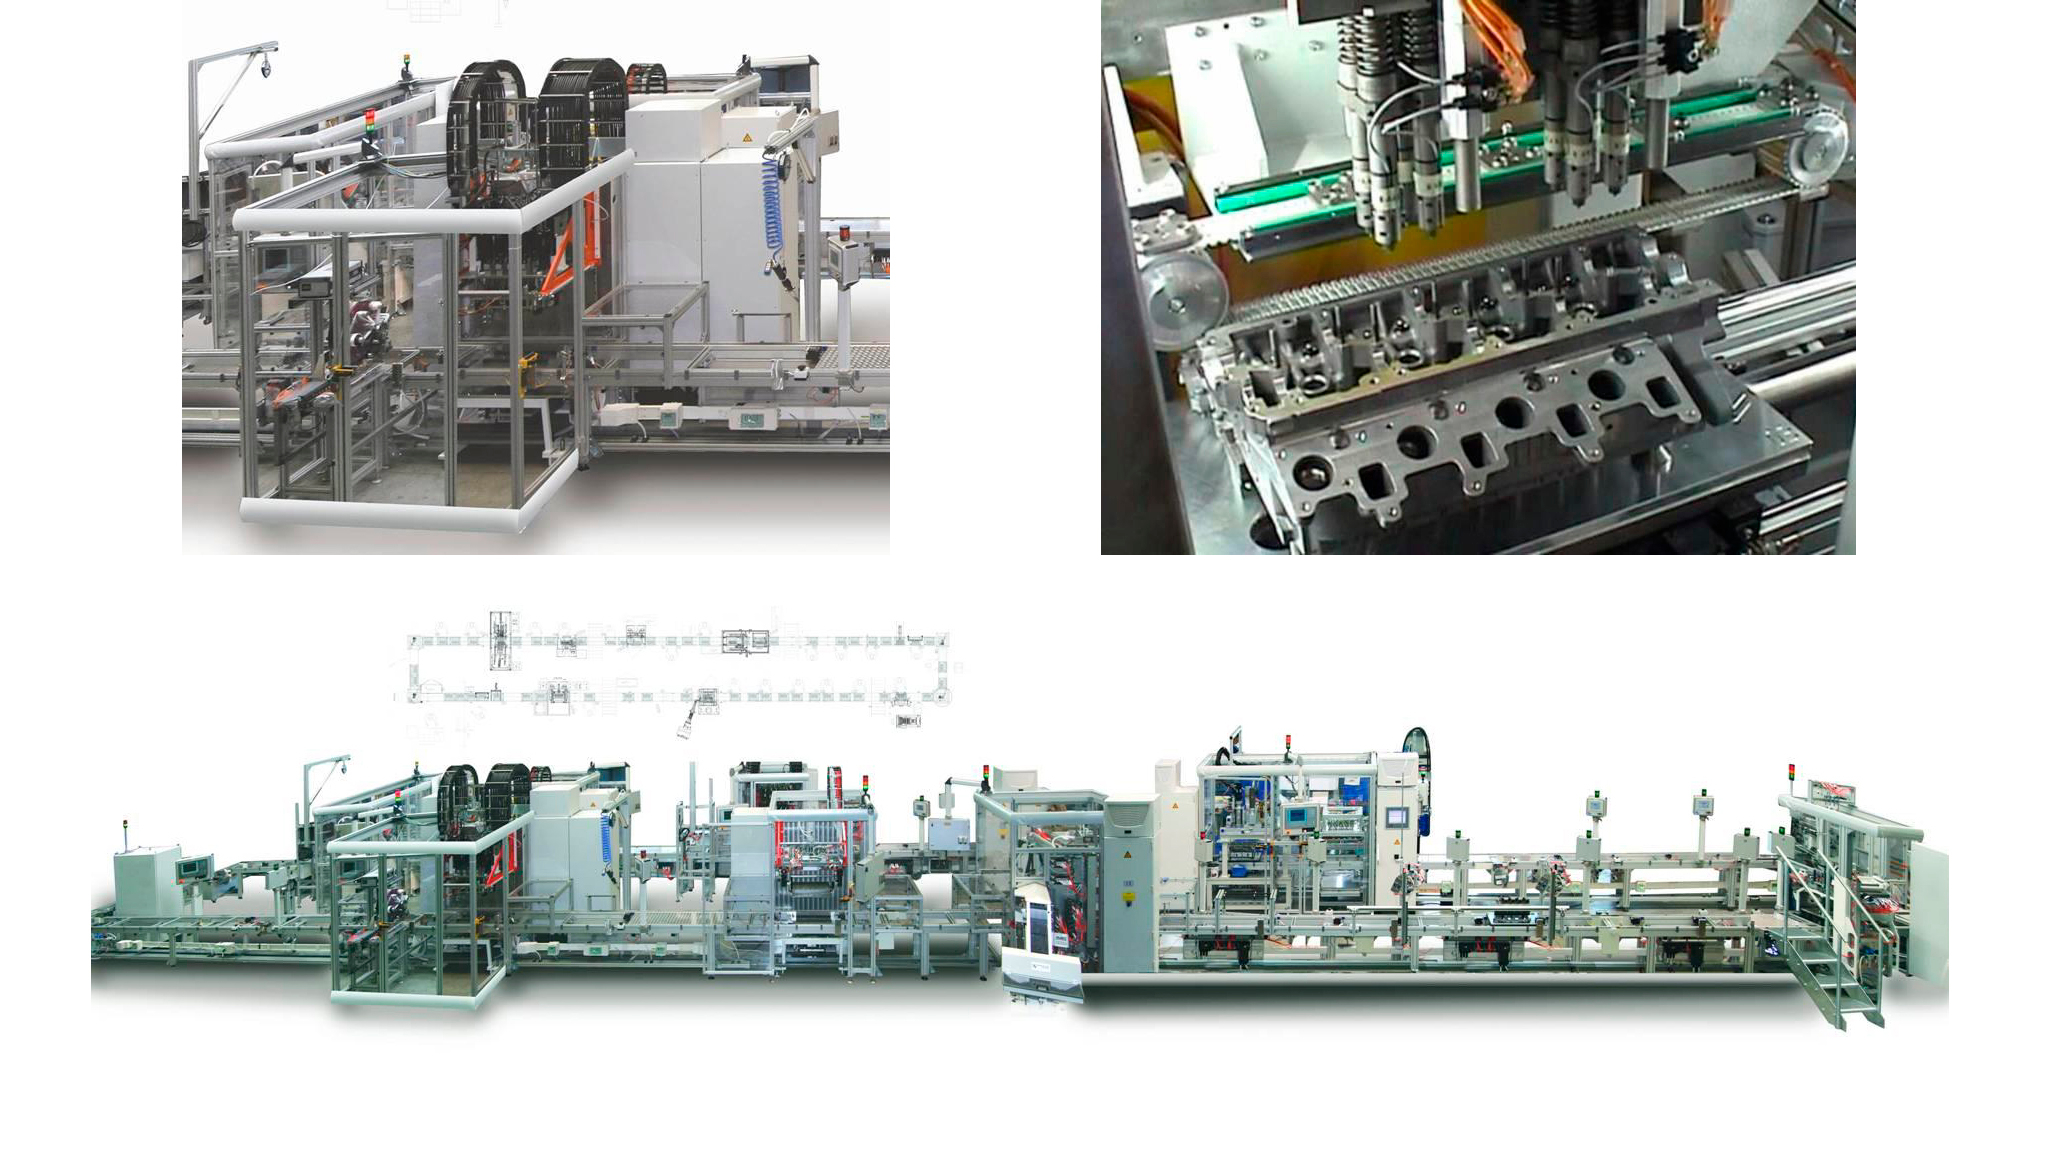 Product Cylinder head assembly systems from the supplier Kiener Maschinenbau